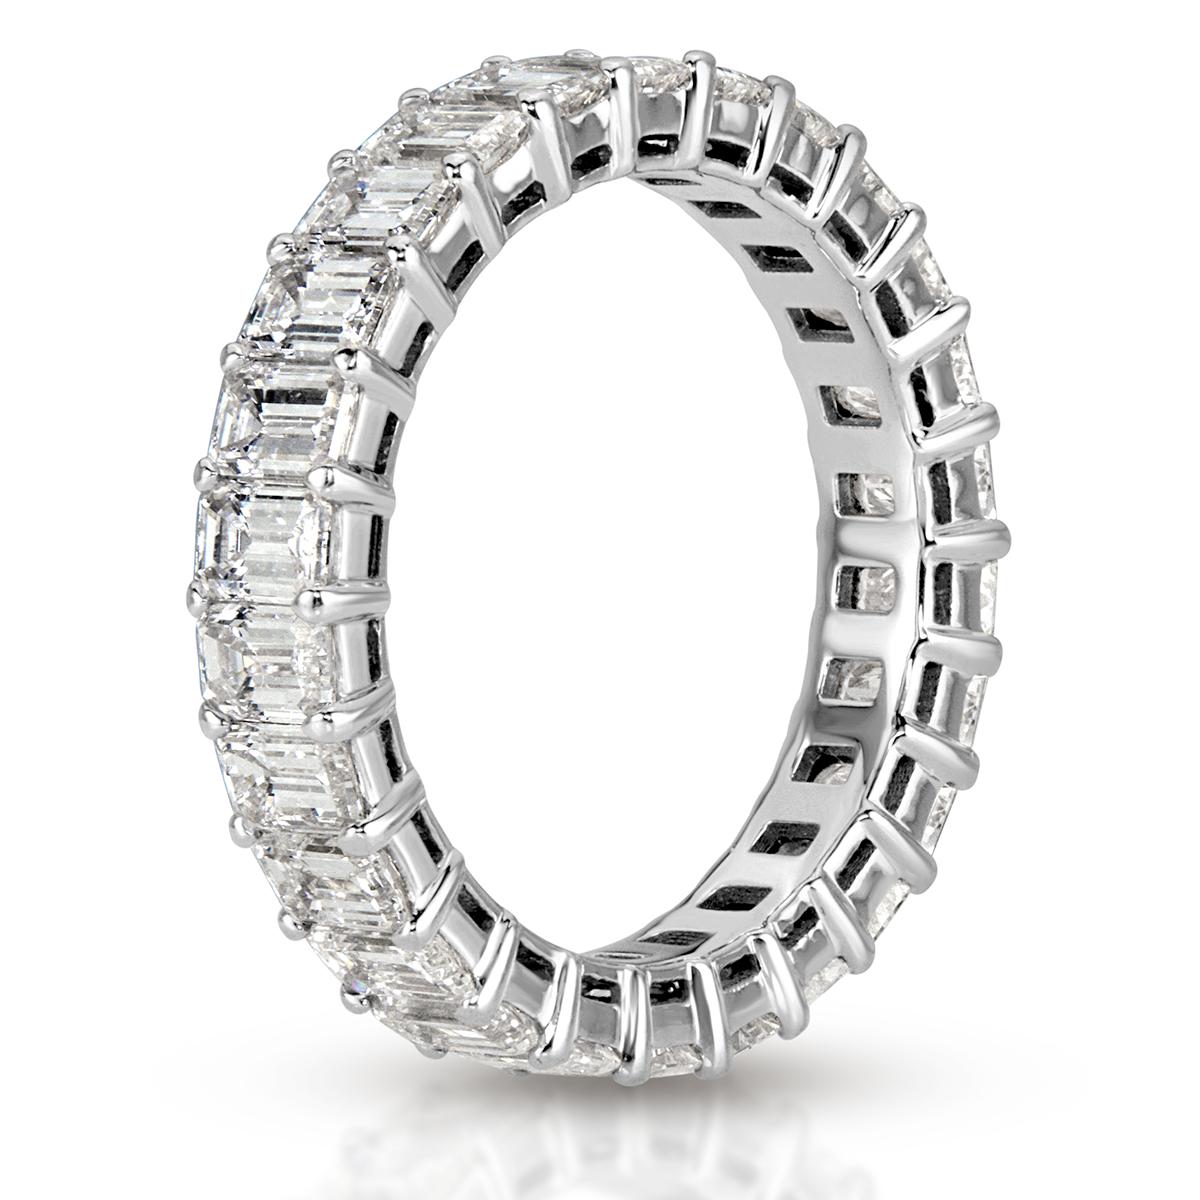 This stunning diamond eternity band showcases 4.00ct of perfectly matched emerald cut diamonds graded at E-F, VVS2-VS1. The diamonds are each hand selected and set in high polish platinum. All eternity bands are shown in a size 6.5. We custom craft